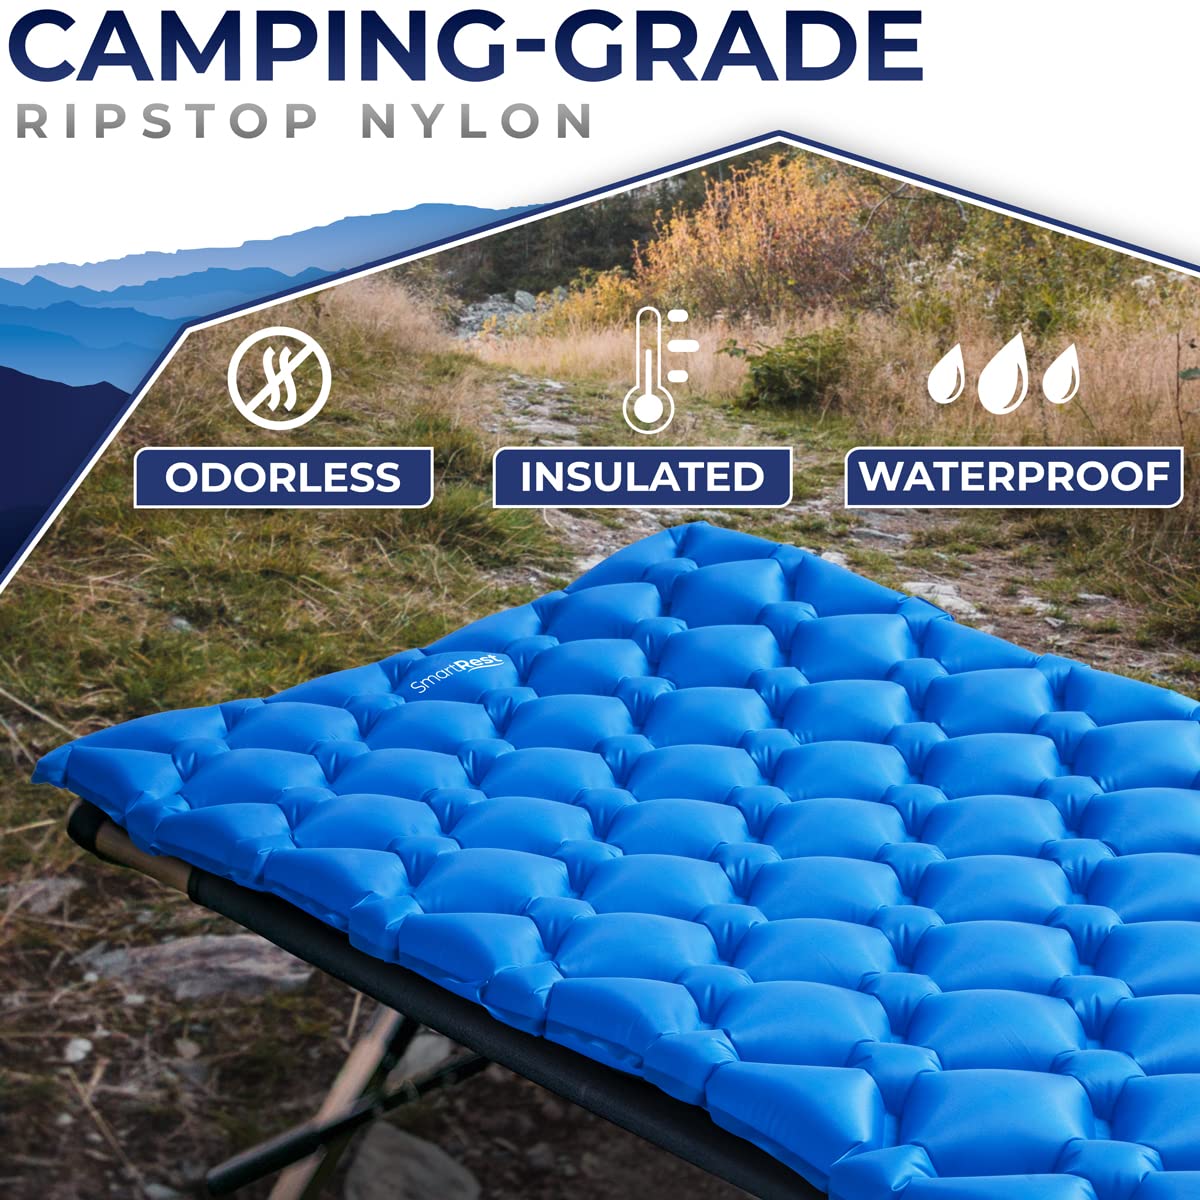 SmartRest Sleeping Pad for Camping - Ultralight Inflatable Air Mat Mattress for Backpacking, Hiking - Camping Gear Essentials and Accessories - S2 Blue